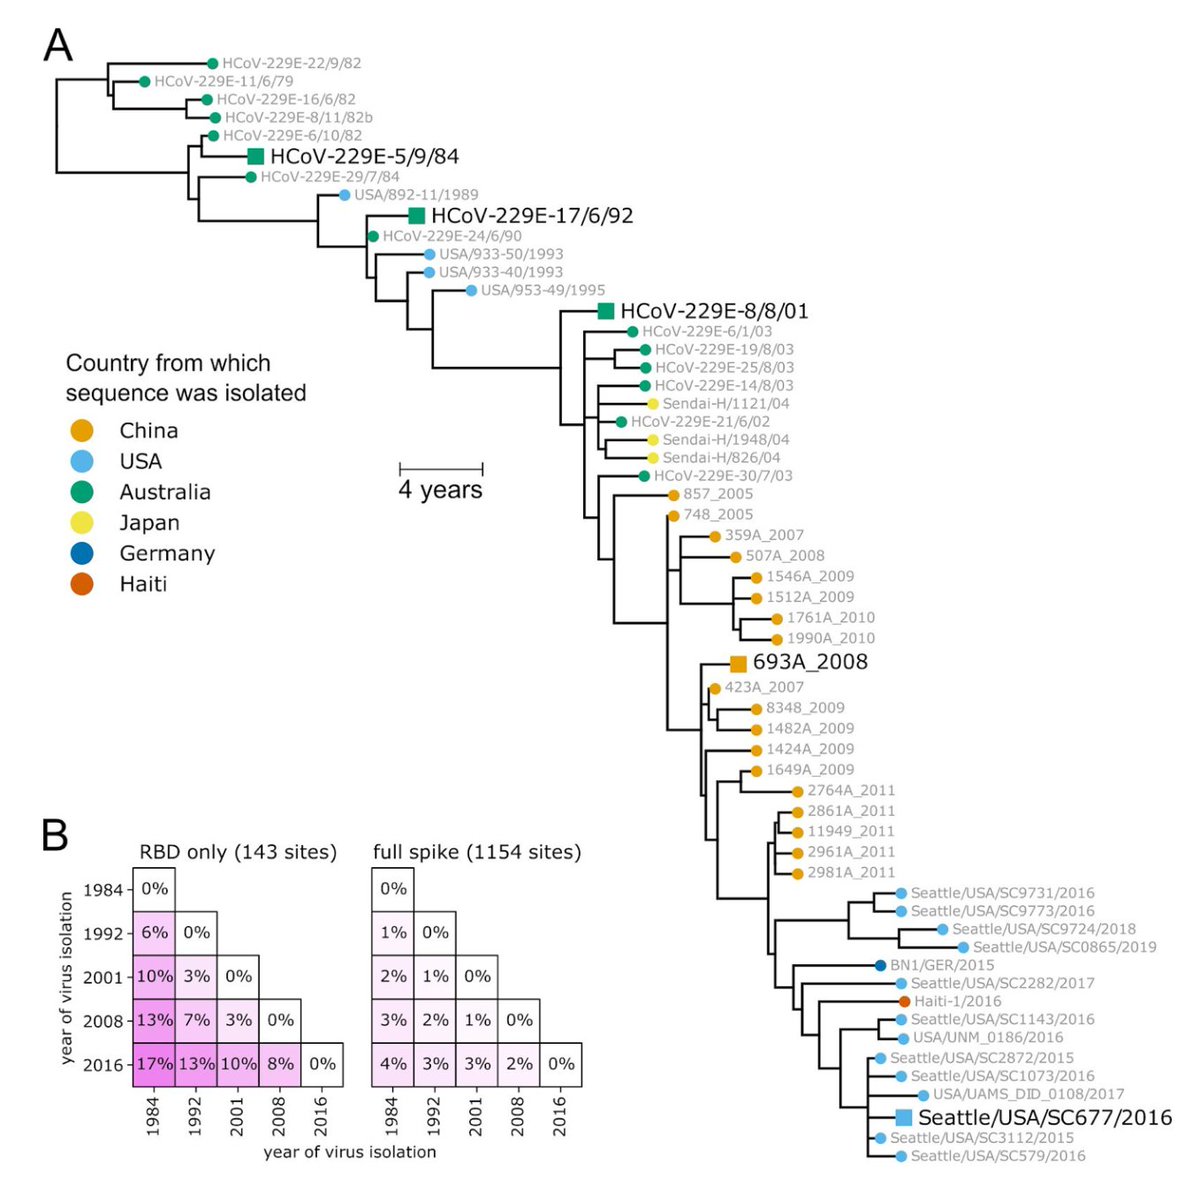 As with influenza, they find a 'ladder-like' phylogenetic tree, suggesting that new variants emerge, become dominant, then are gradually replaced by subsequent new variants. (Influenza A/H3N2 below right from:  https://www.nature.com/articles/nature14460) 3/